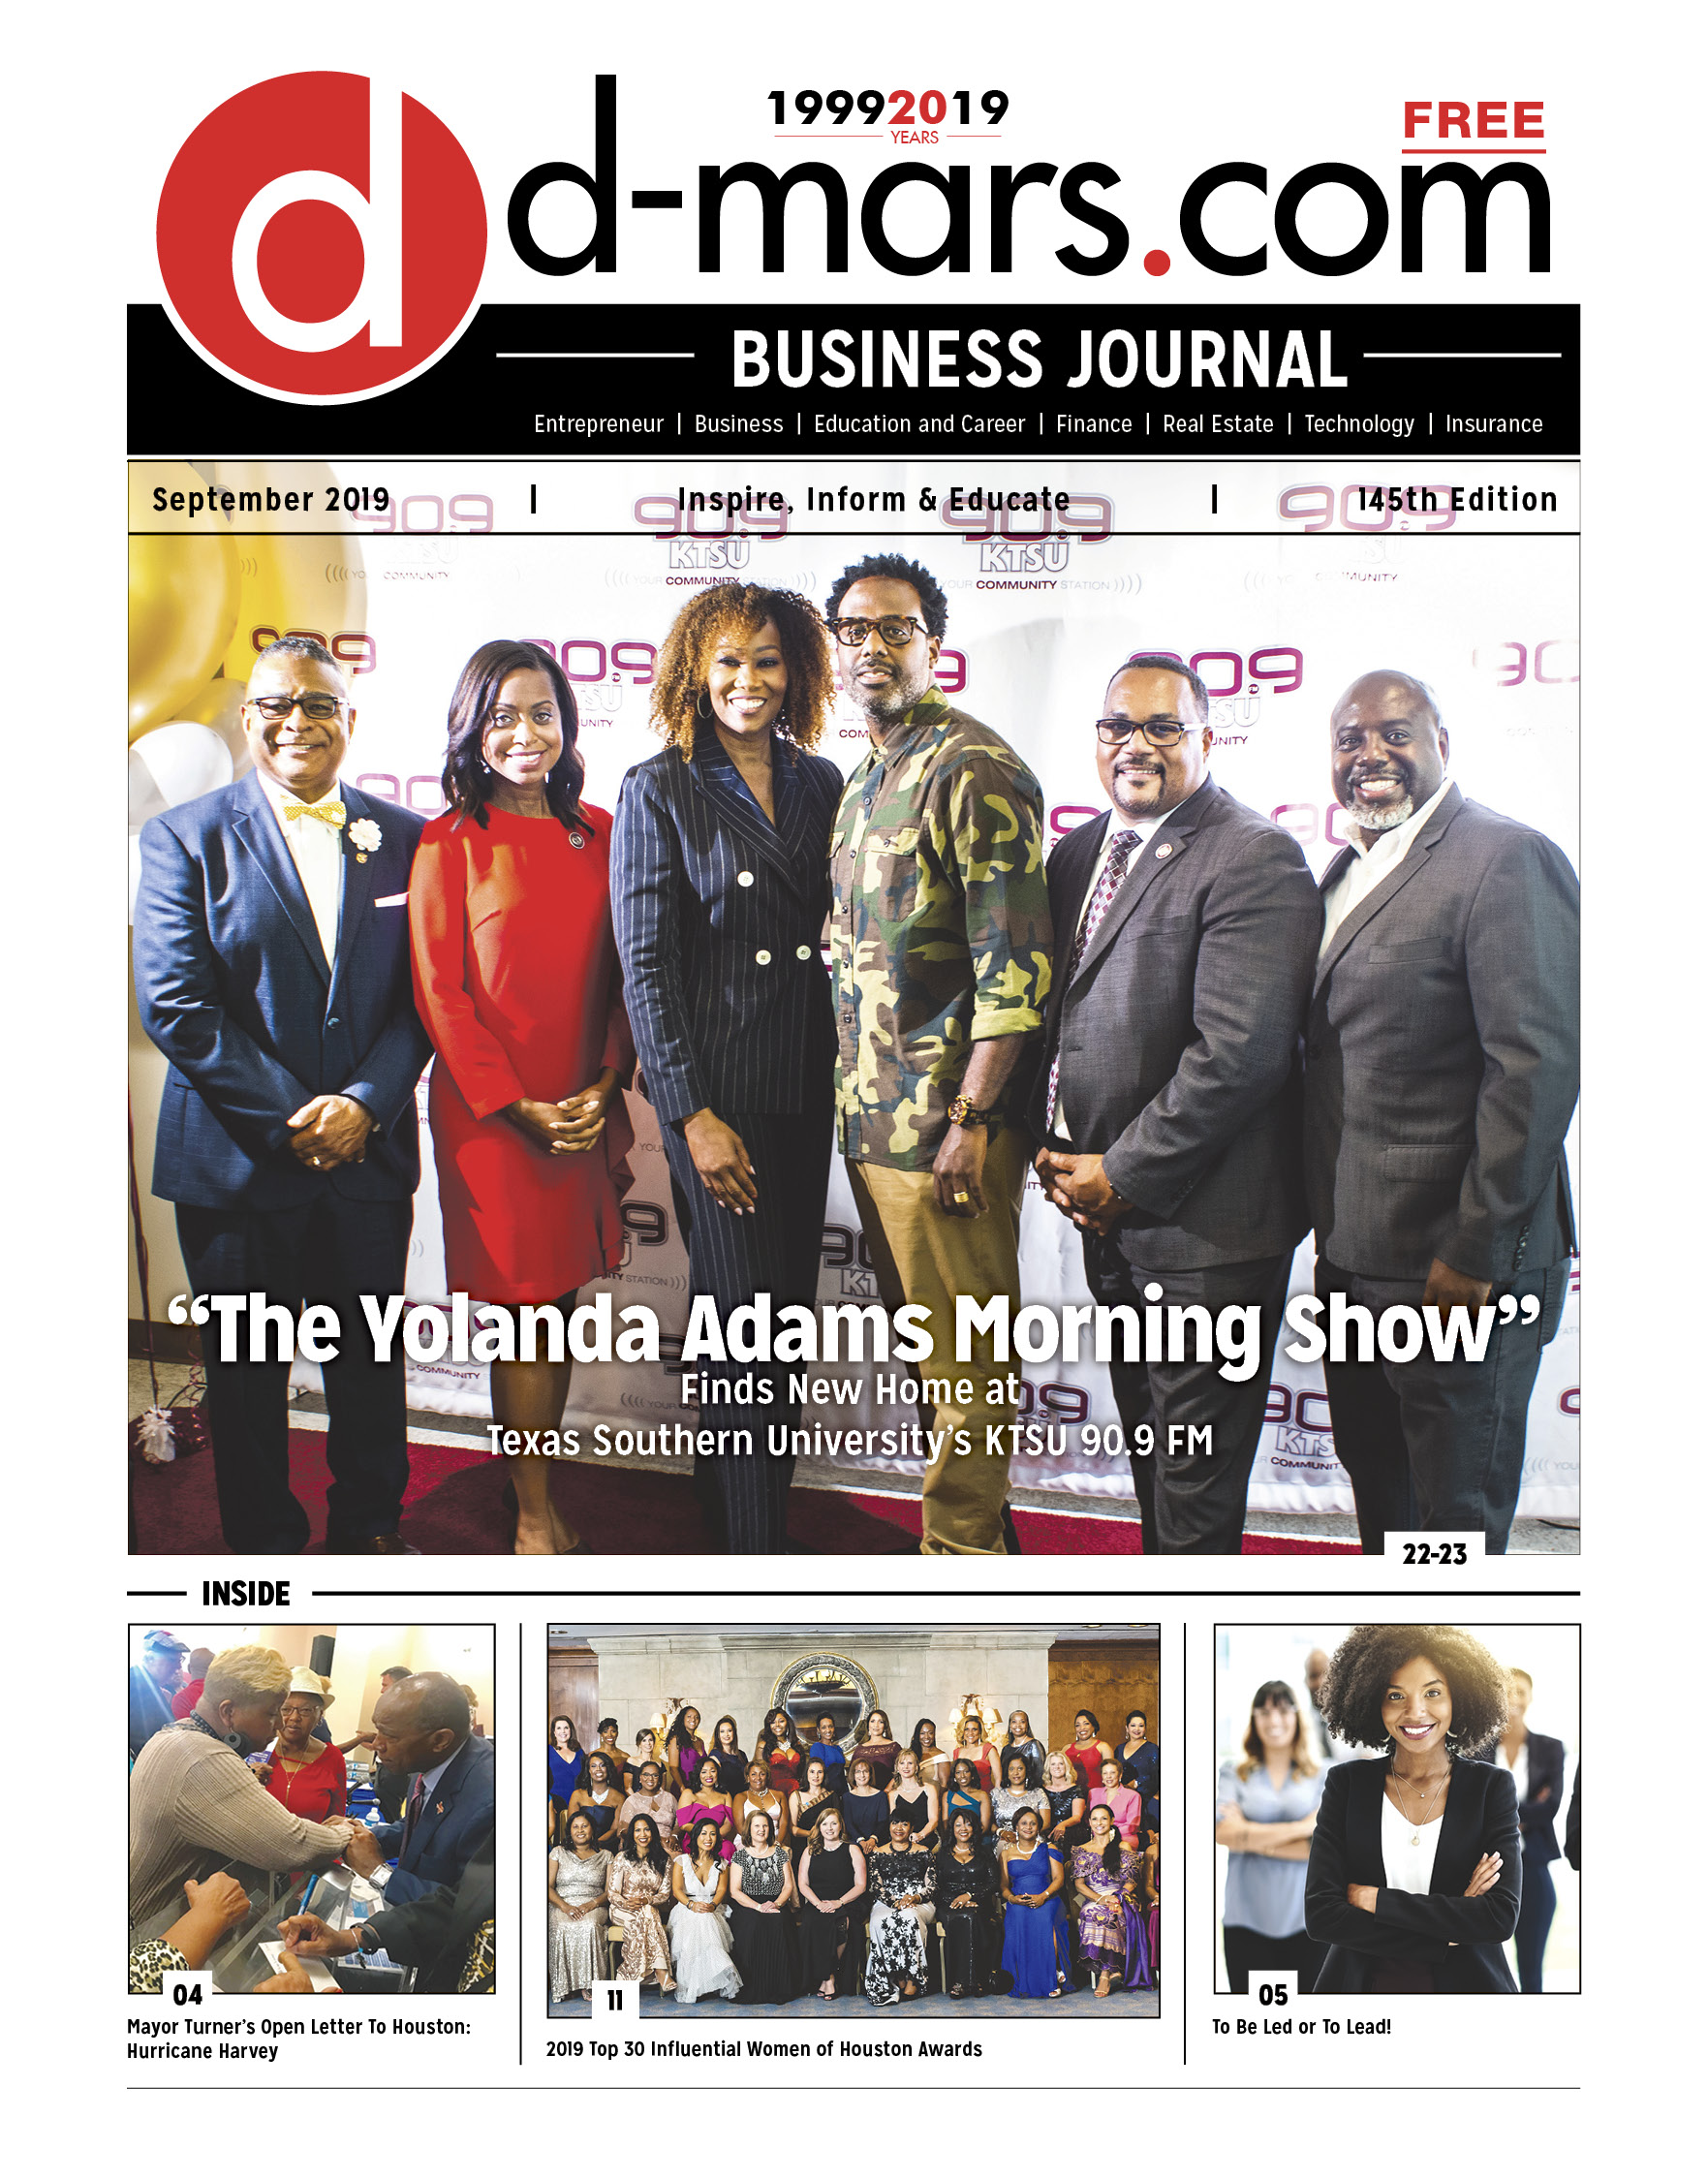 The Yolanda Adams Morning Show finds a new home at Texas Southern University’s KTSU 90.9FM